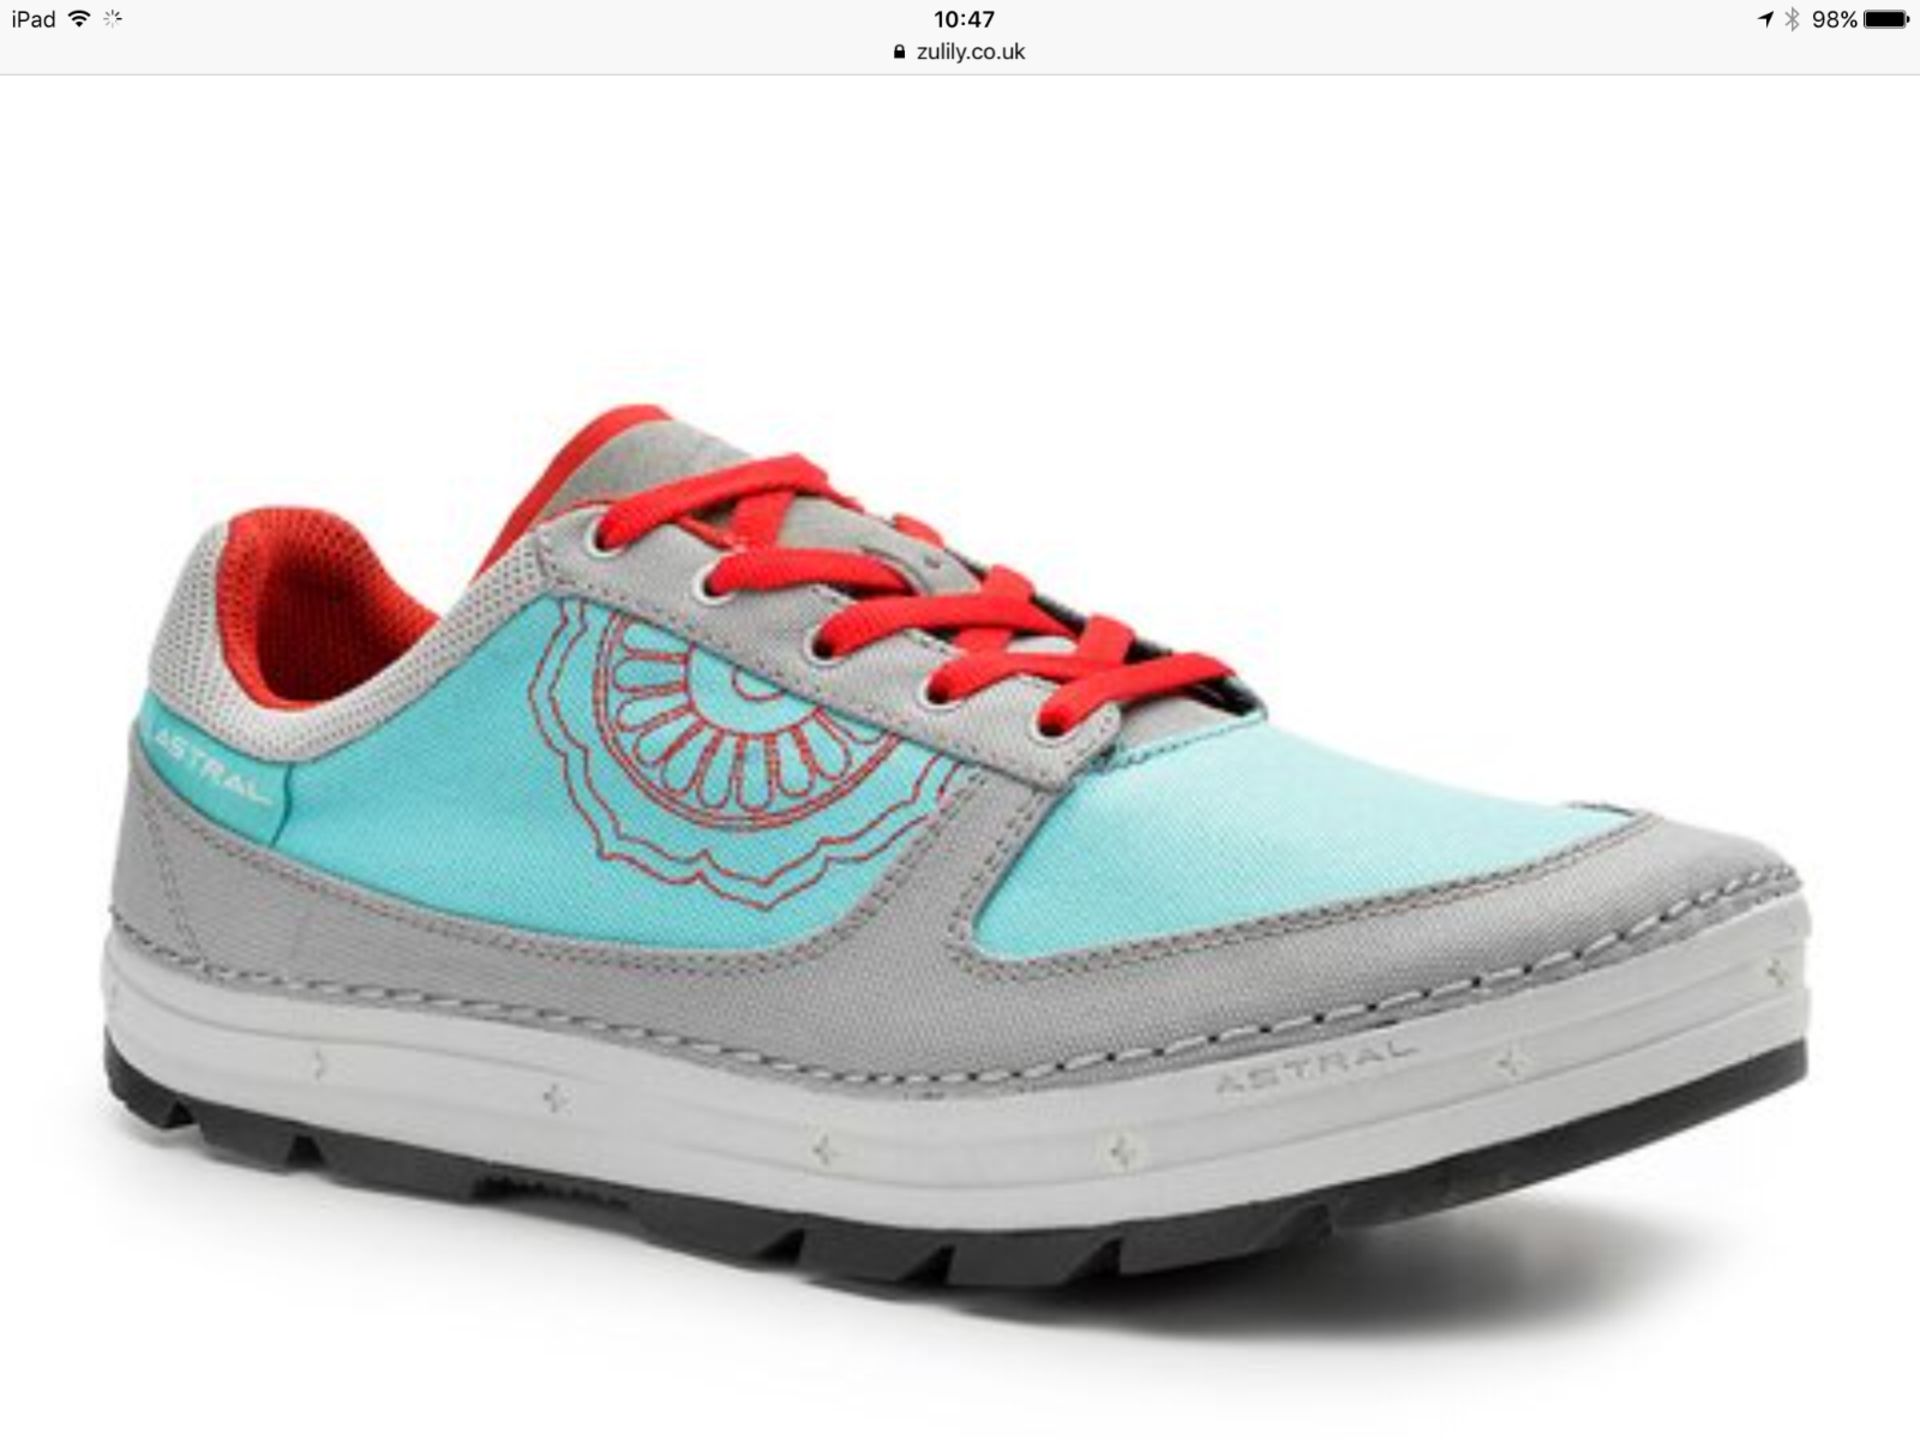 ASTRAL Turquoise & Granite Grey Tinker Sneaker, Size UK 8.5 (New with box) [Ref: 43759909]